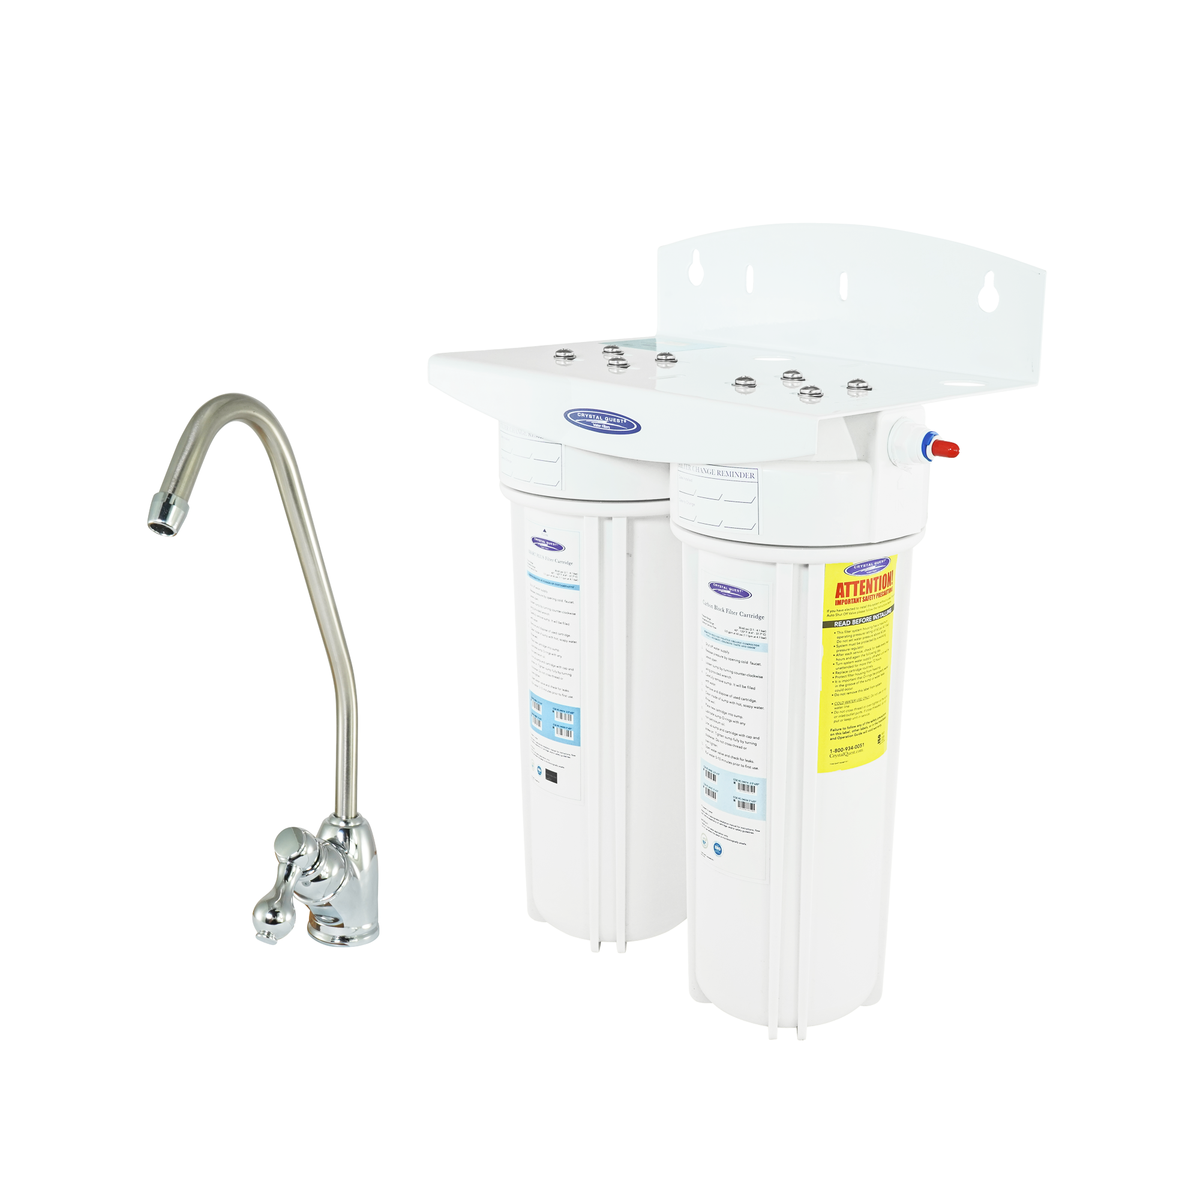 Double SMART Under Sink Water Filter System - Under Sink Water Filters - Crystal Quest